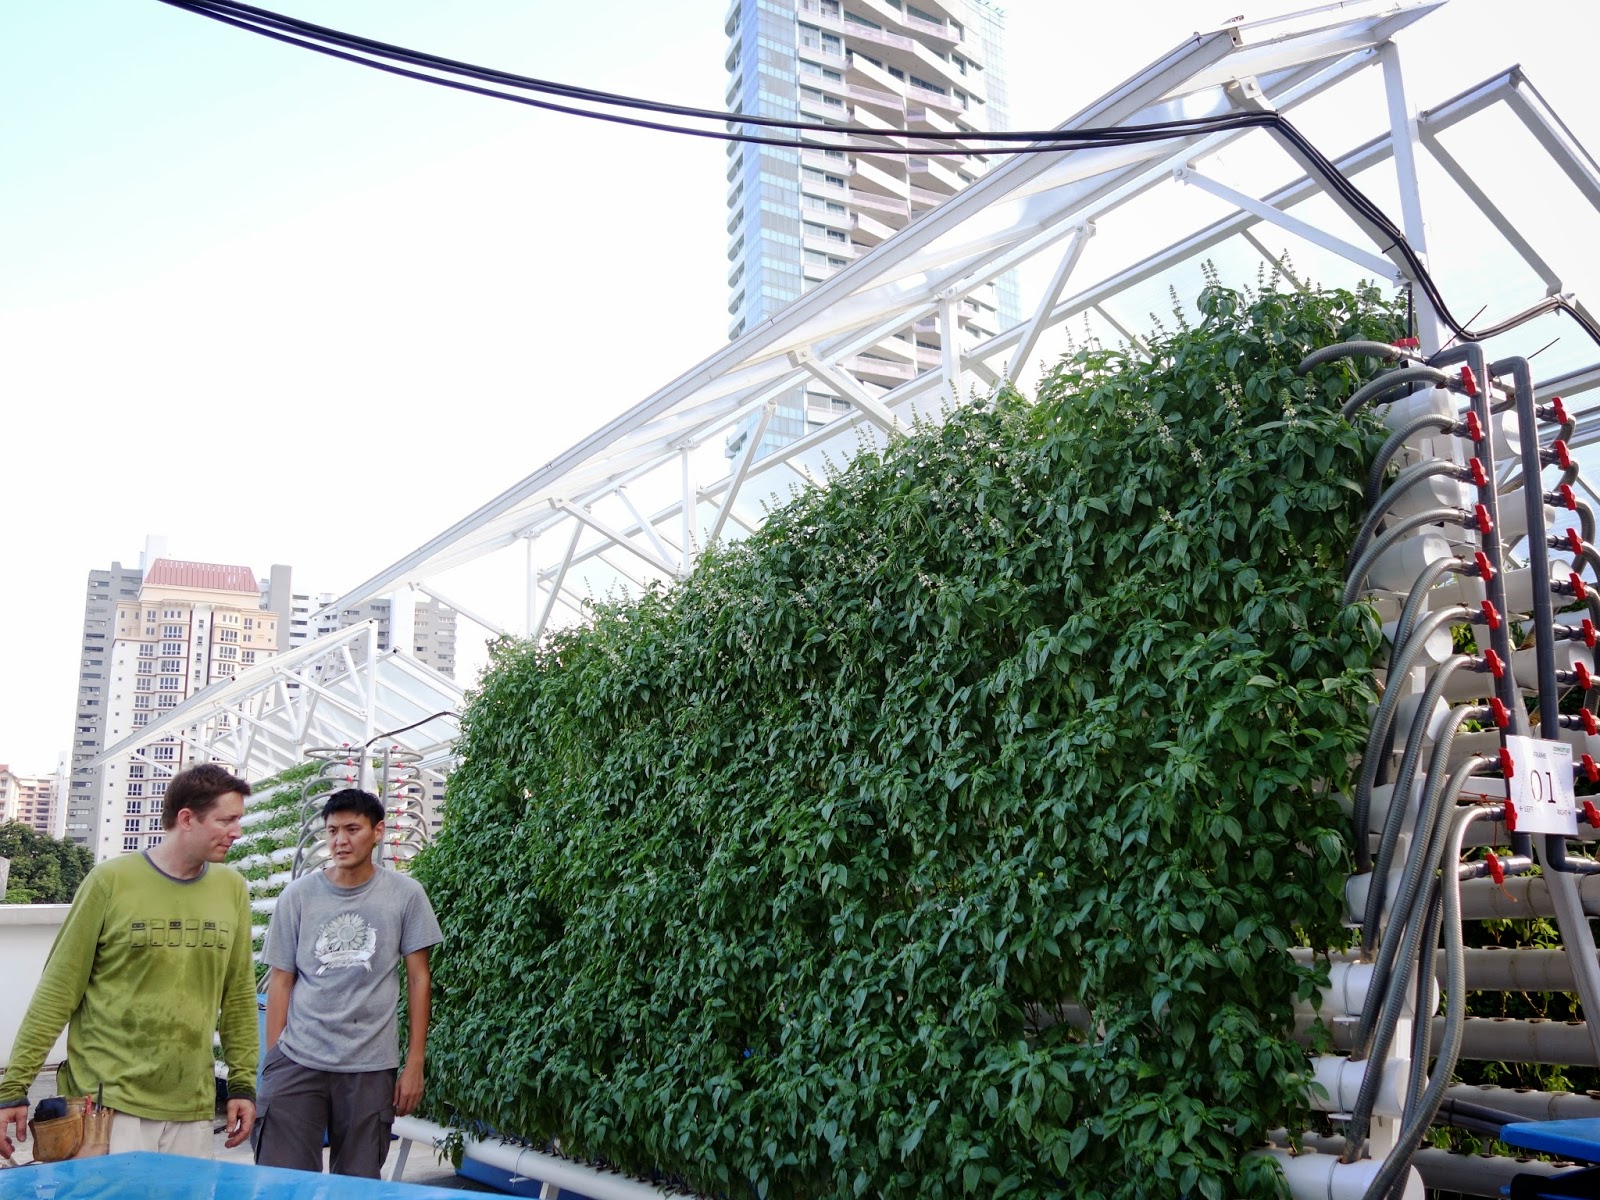  Singapore's First Rooftop Aquaponic Farm In The Heart Of Orchard Road